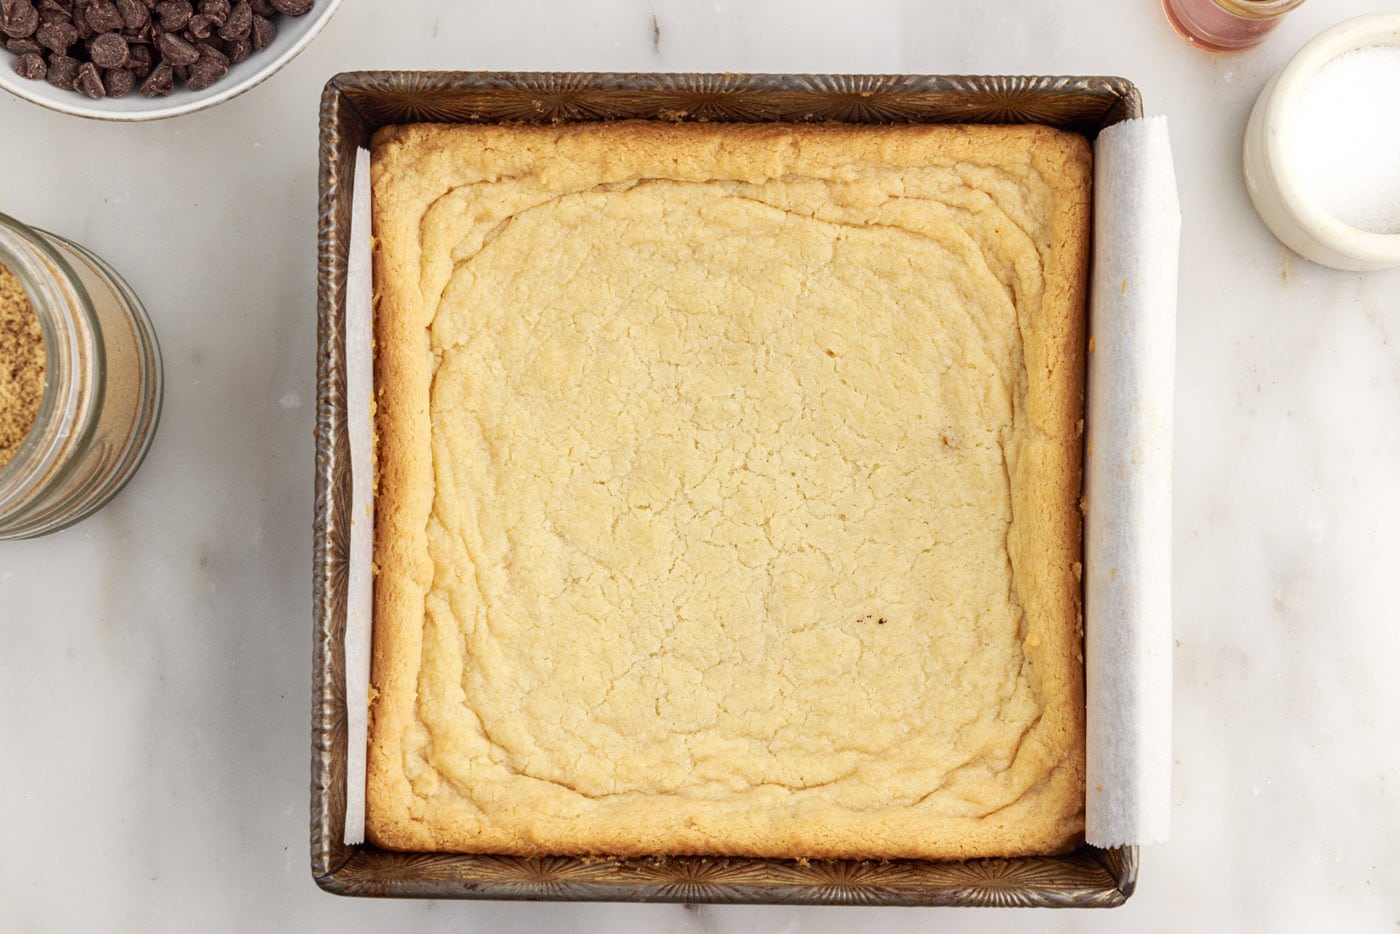 baked shortbread crust in a pan